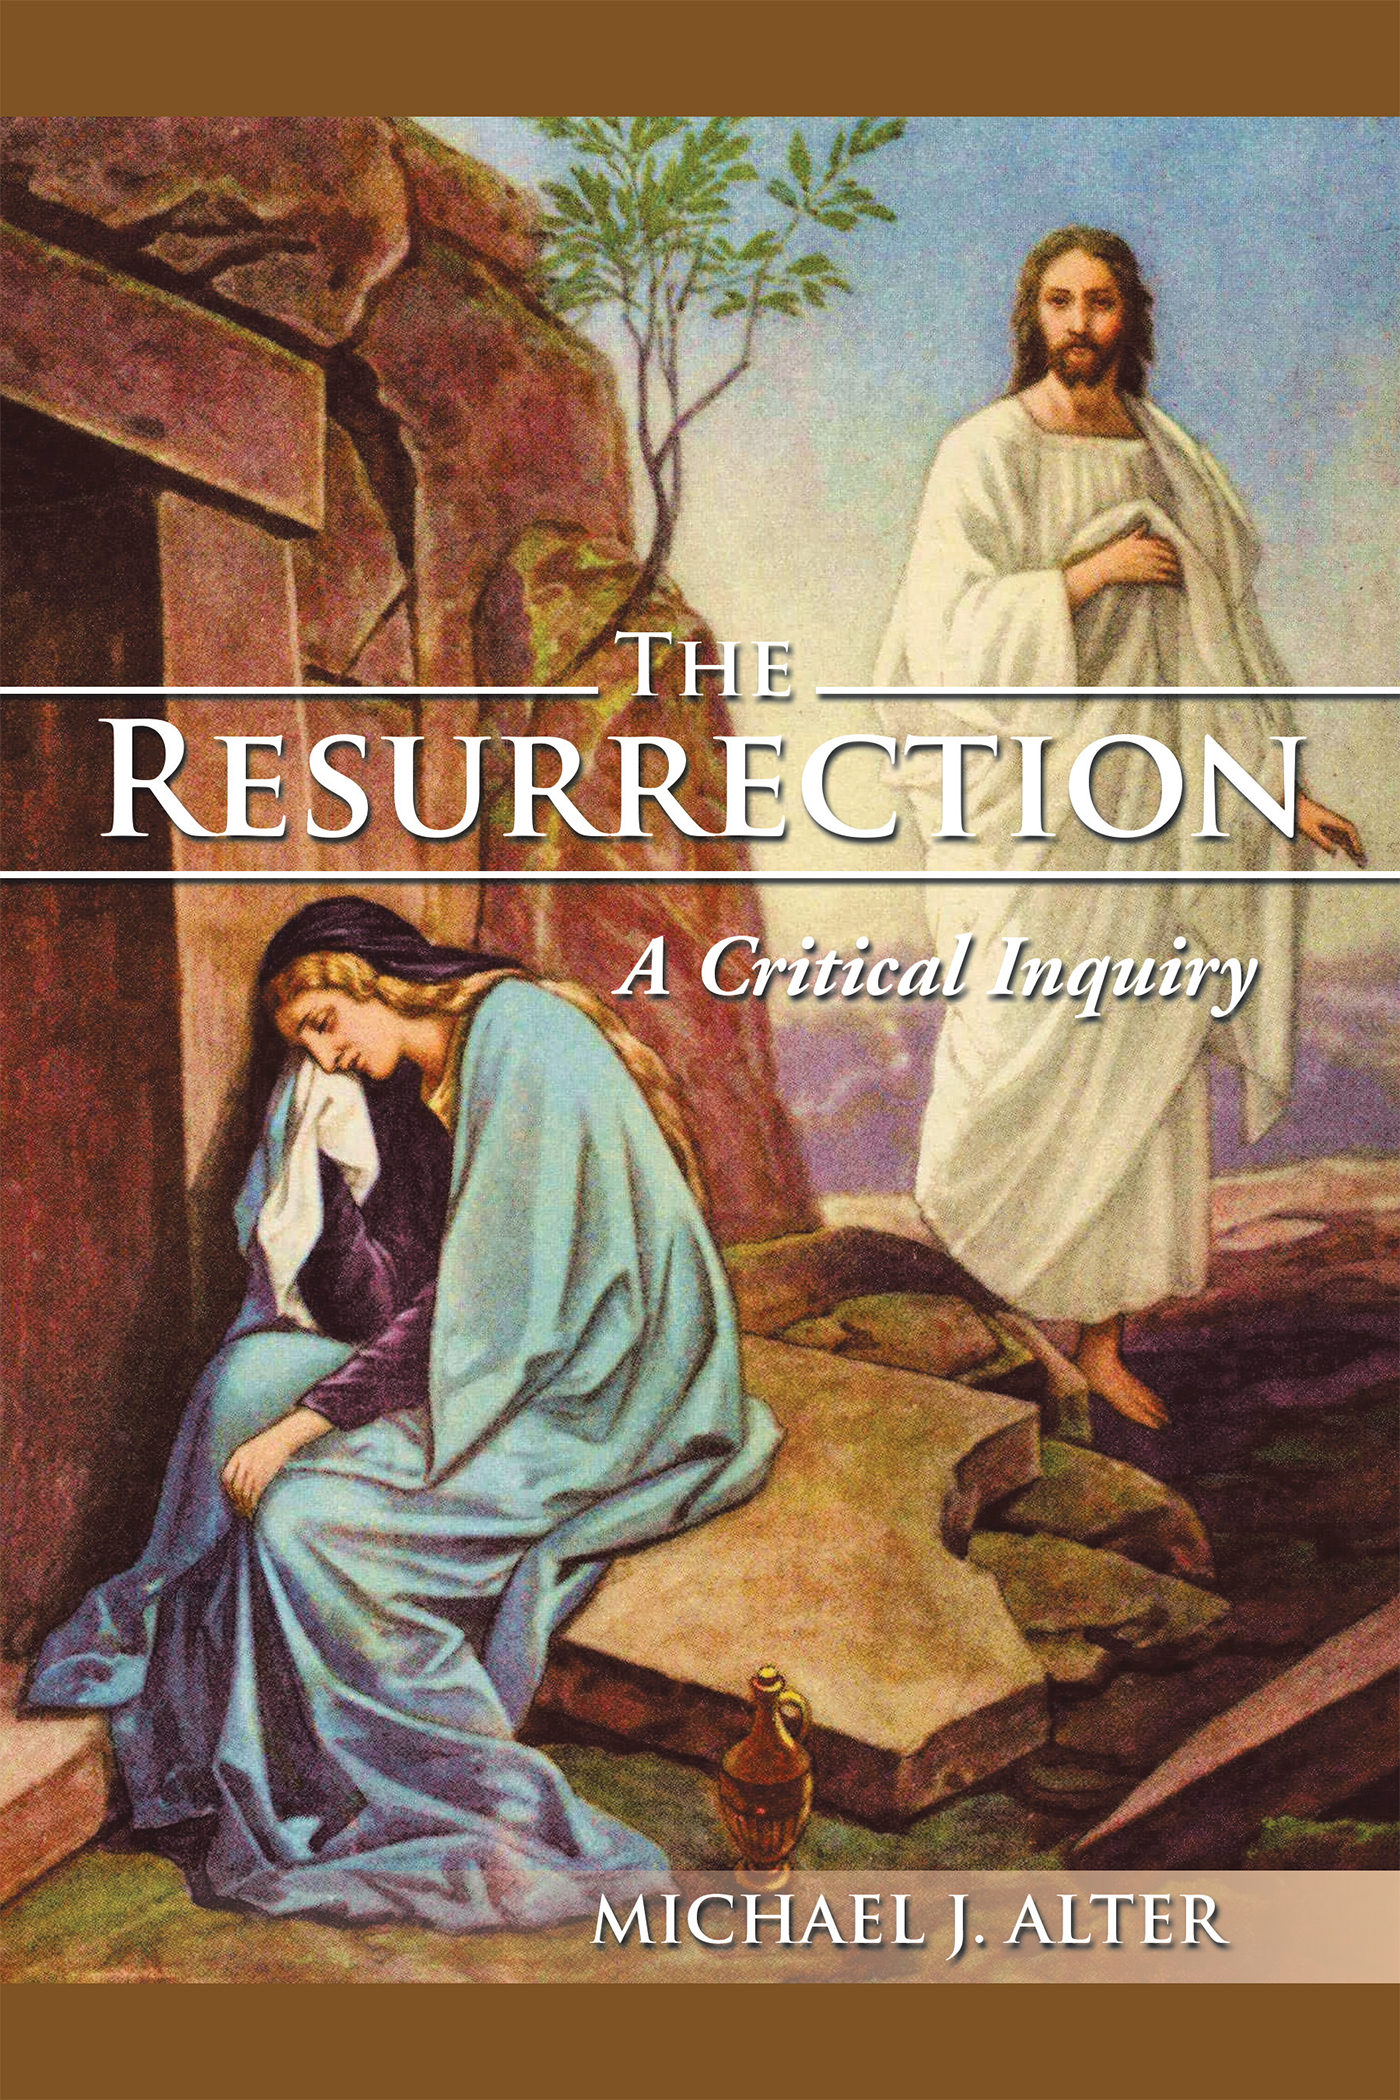 New book, "The Resurrection: A Critical Inquiry" challenges the